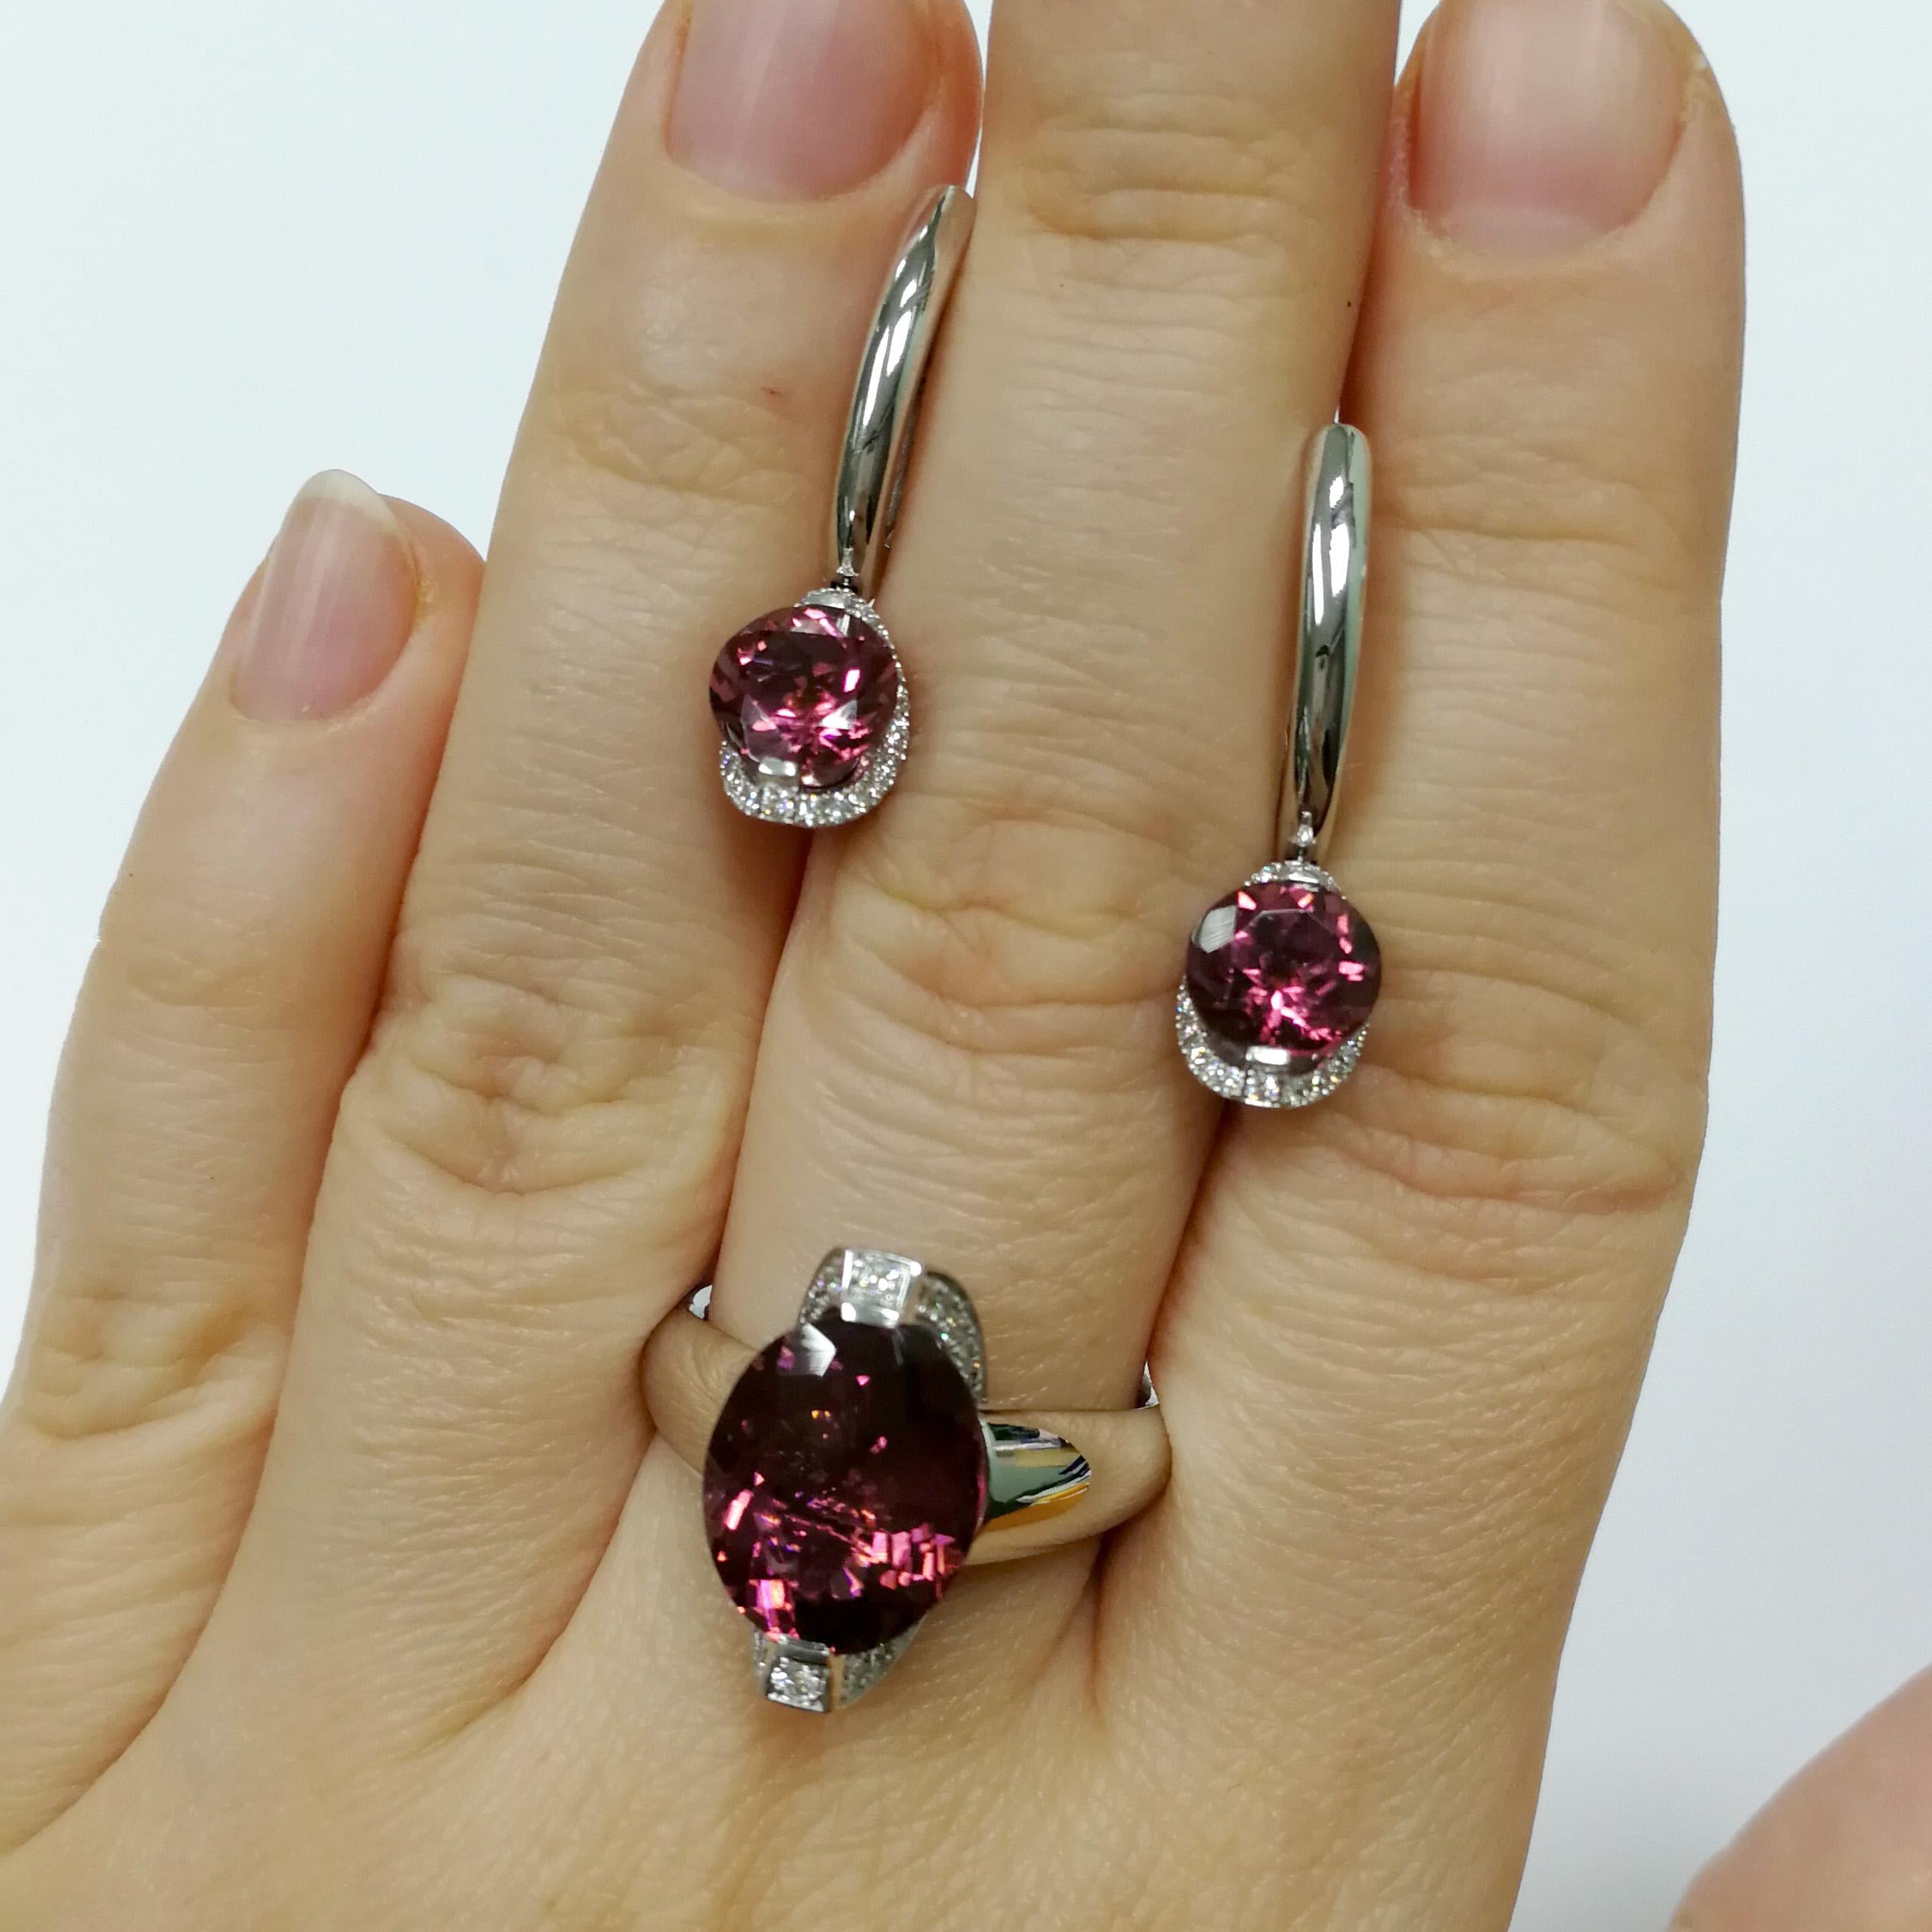 Pink Tourmaline Diamonds 18 Karat White Gold Moon Suite
When you look at this Suite, there are some absolutely cosmic associations. And there is a reason for this. The central Hot Pink Tourmalines 